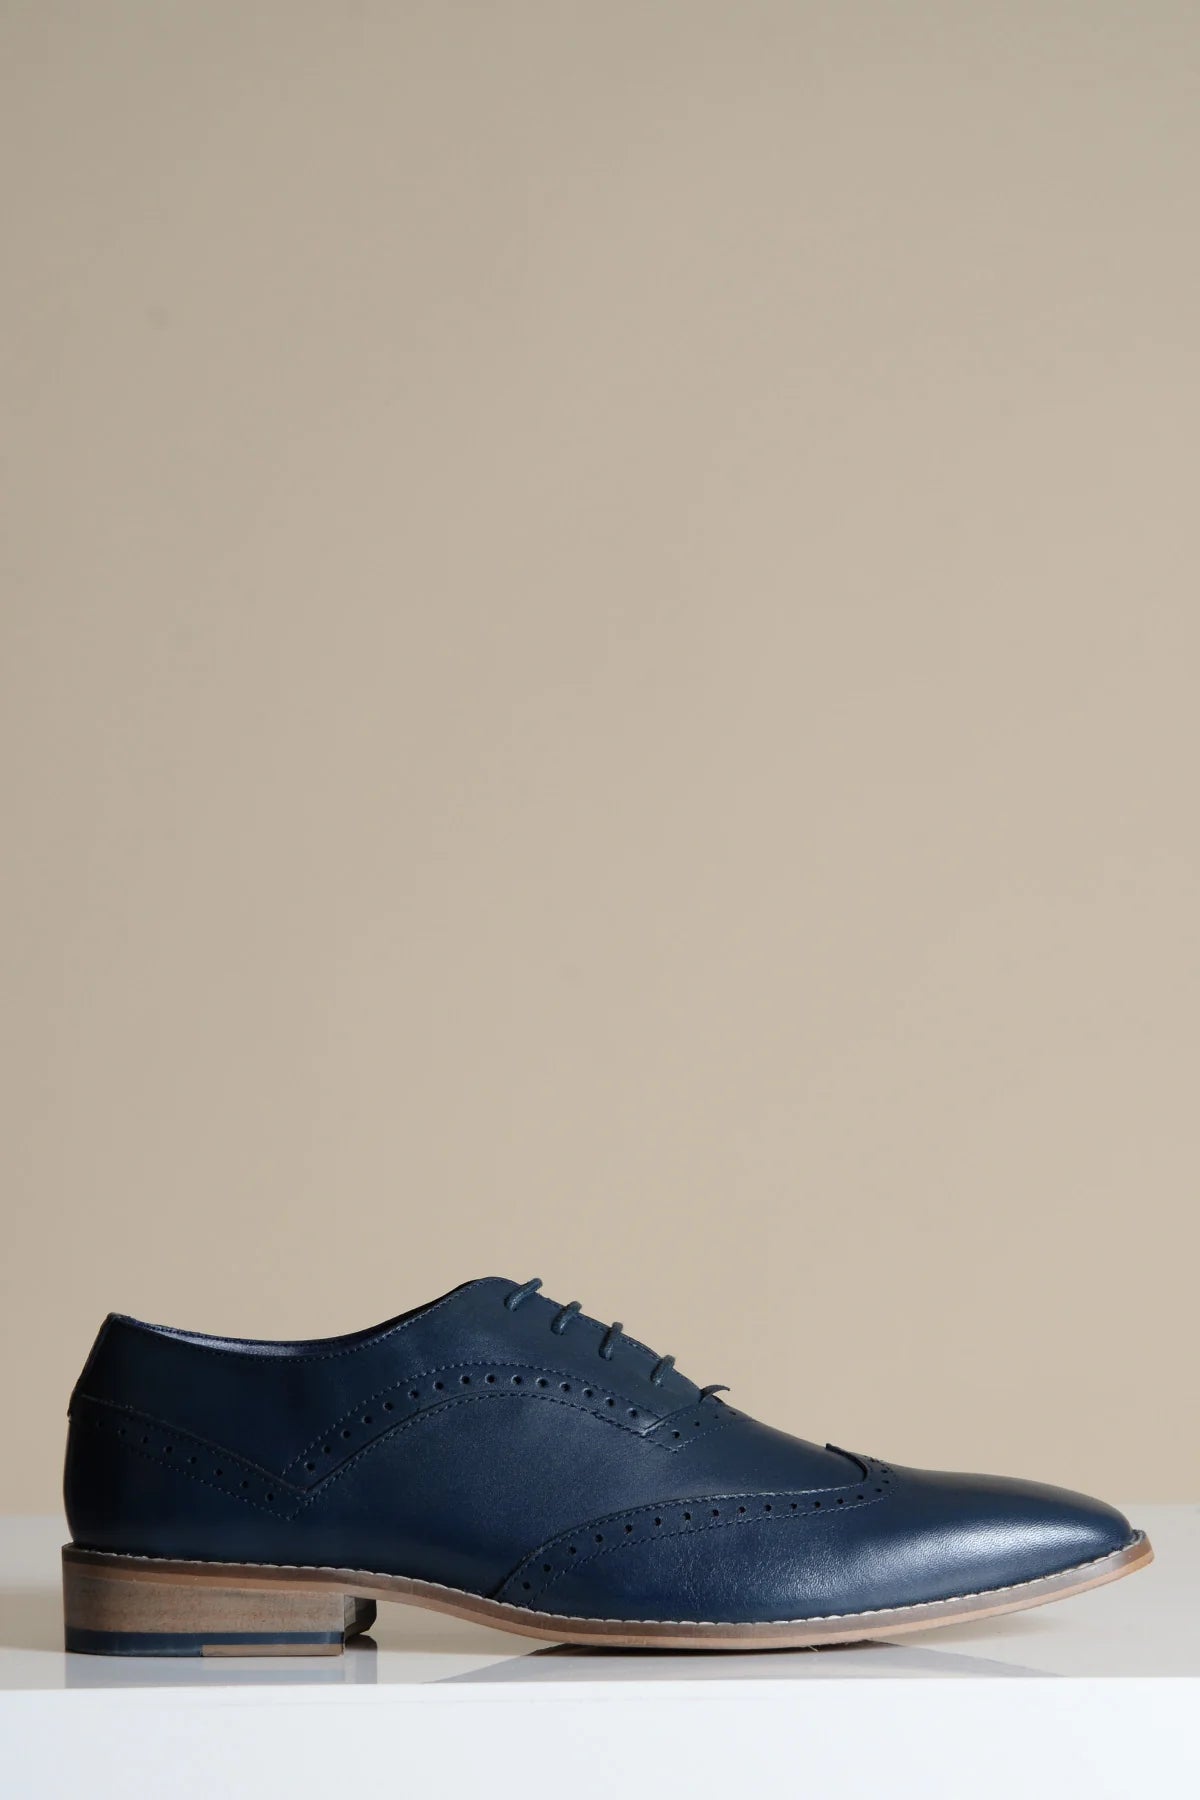 Navy leather shoes, Marc Darcy Dawson - Wingtip brogue